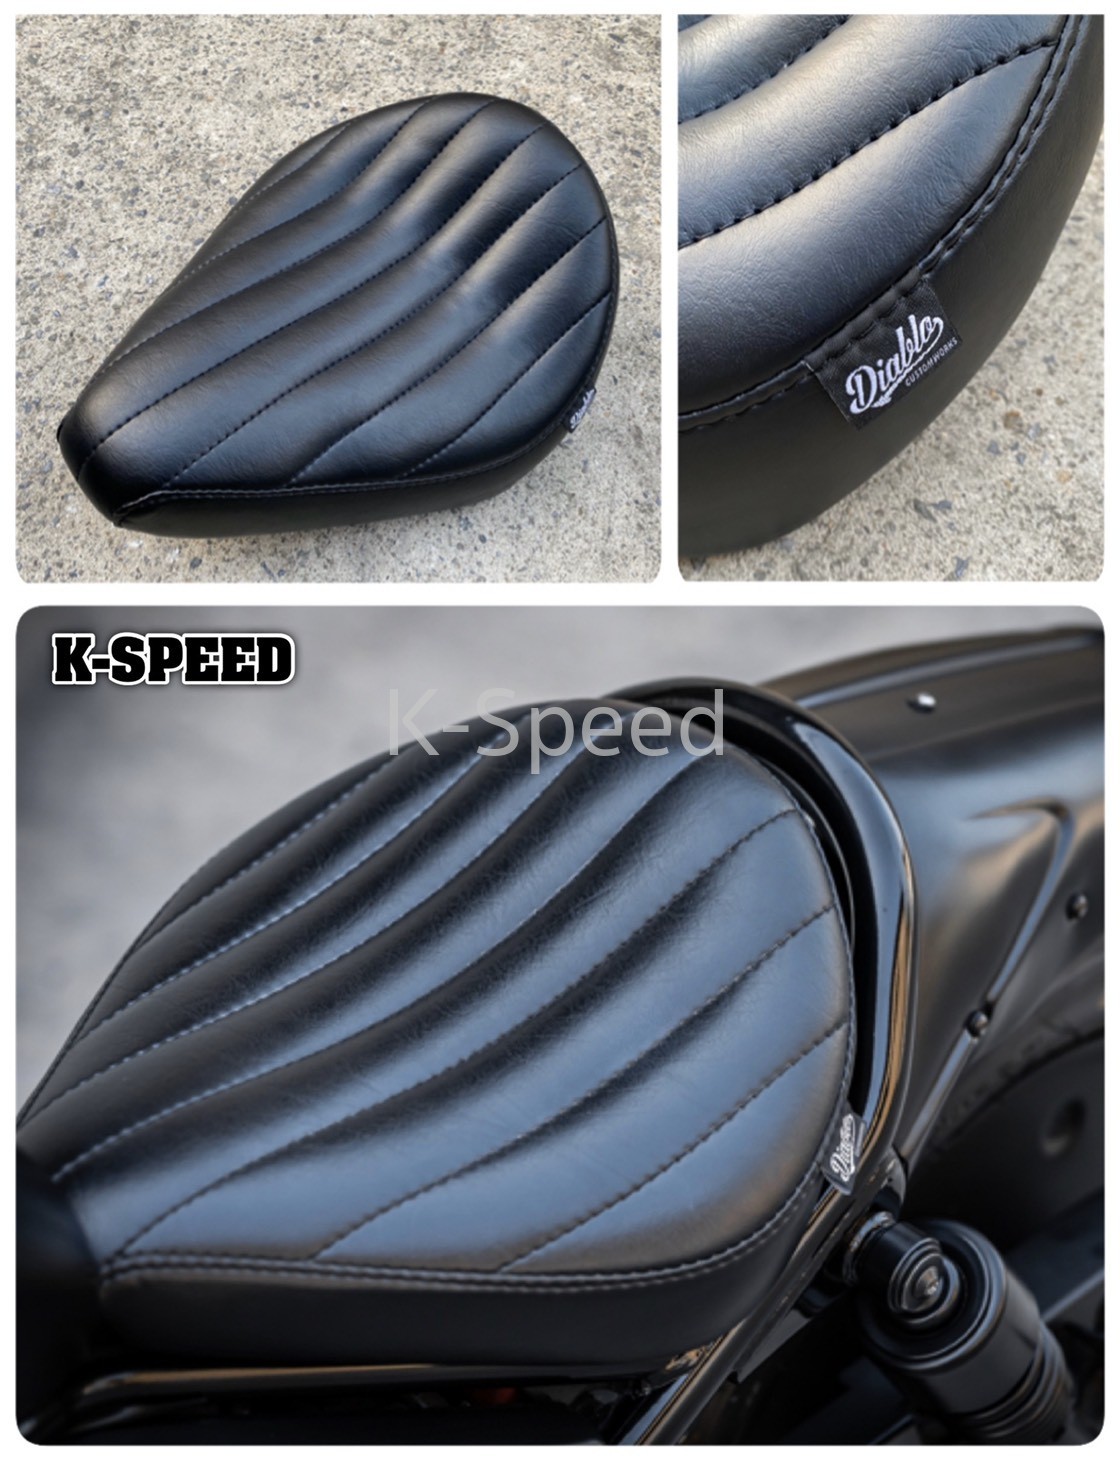 Daiblo Single seat with straight pattern for Rebel 300 & 500